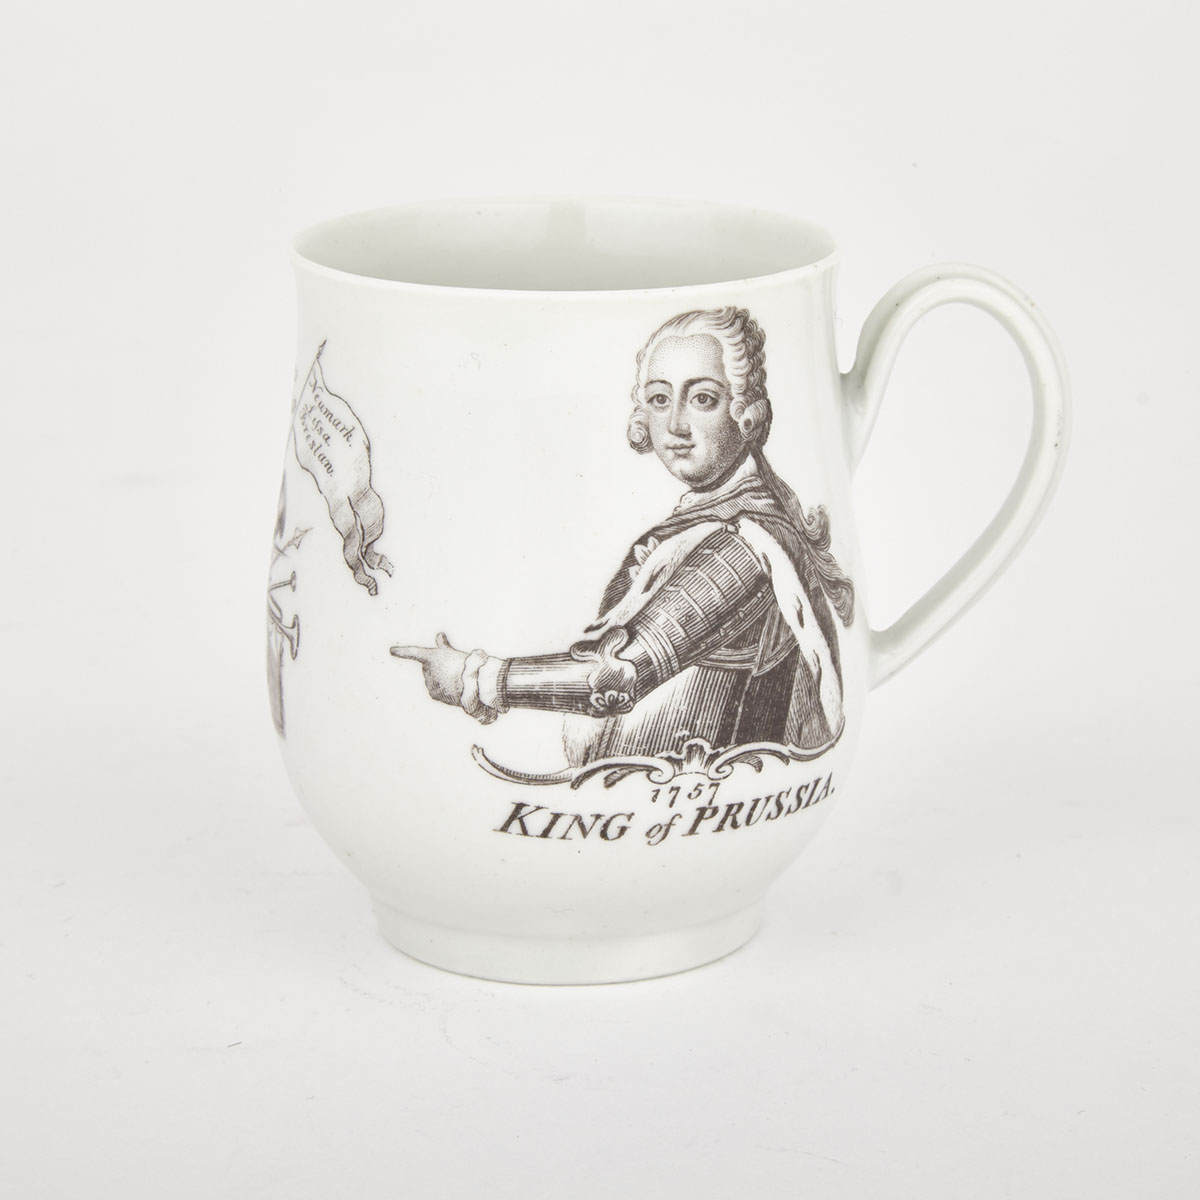 Worcester Black Printed ‘King of Prussia’ Small Mug, dated 1757